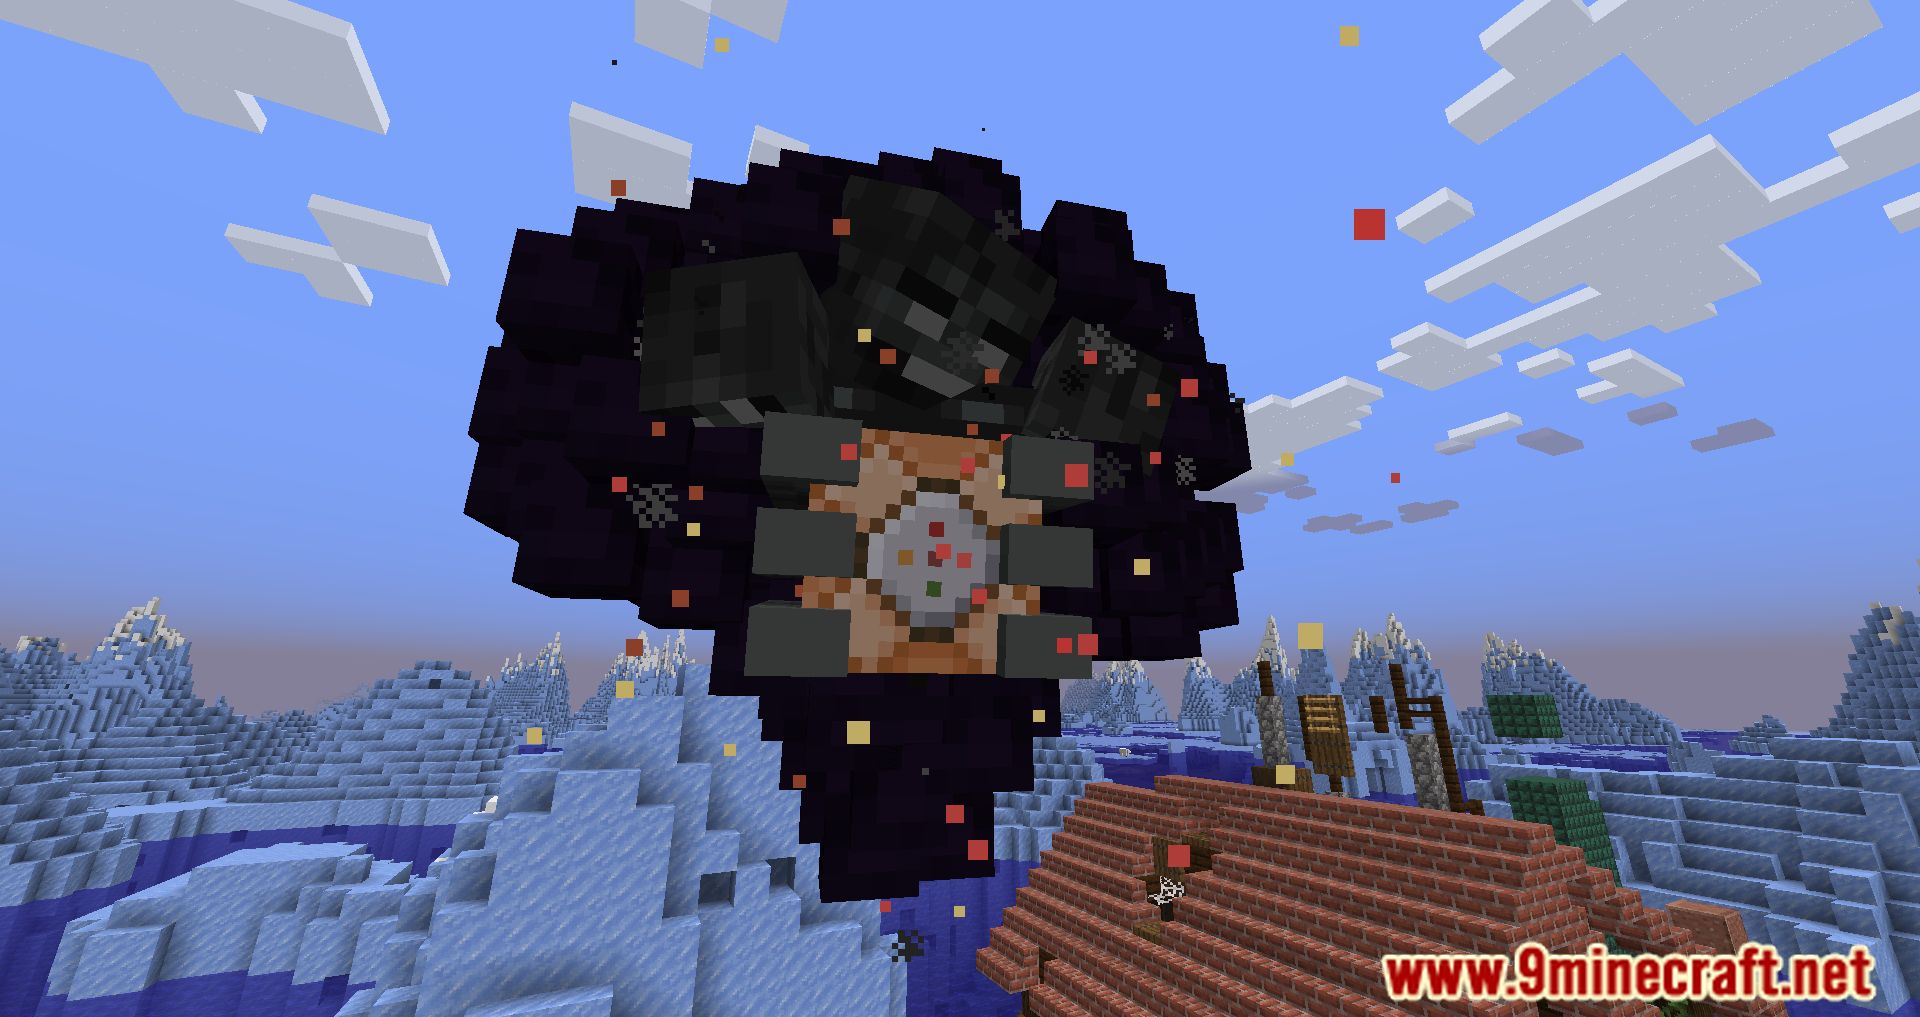 Download Crackers Wither Storm - Minecraft Mod 2.0.1.2 for Windows